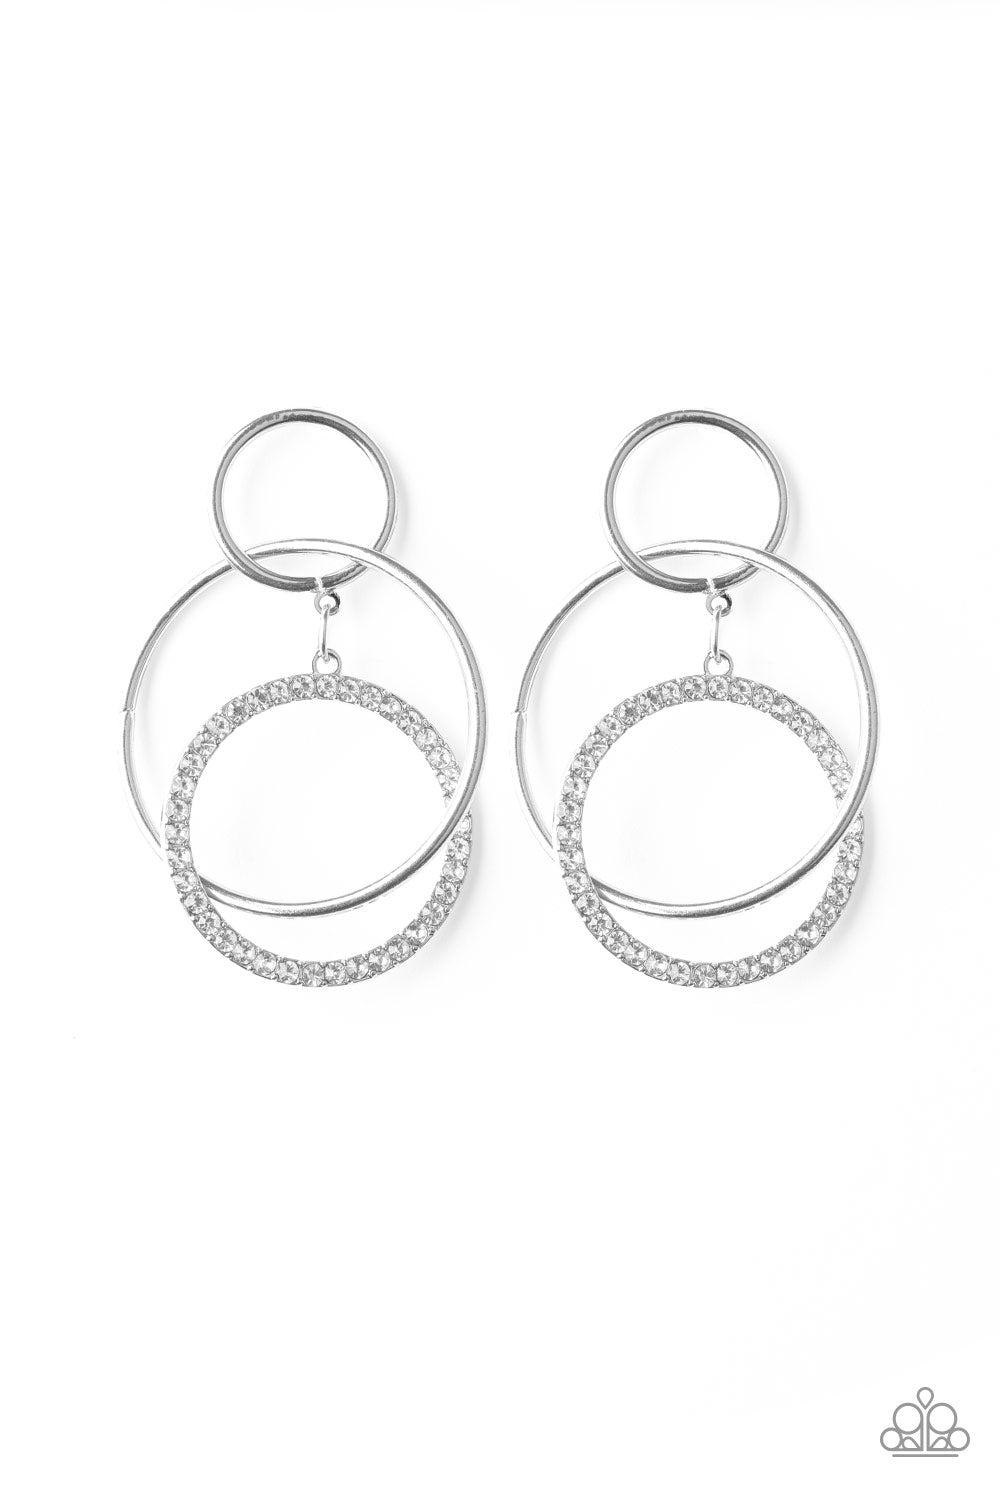 METRO BLISS - WHITE CLEAR RHINESTONES TRIPLE CIRCLES POST LIFE OF THE PARTY HOOP EARRINGS